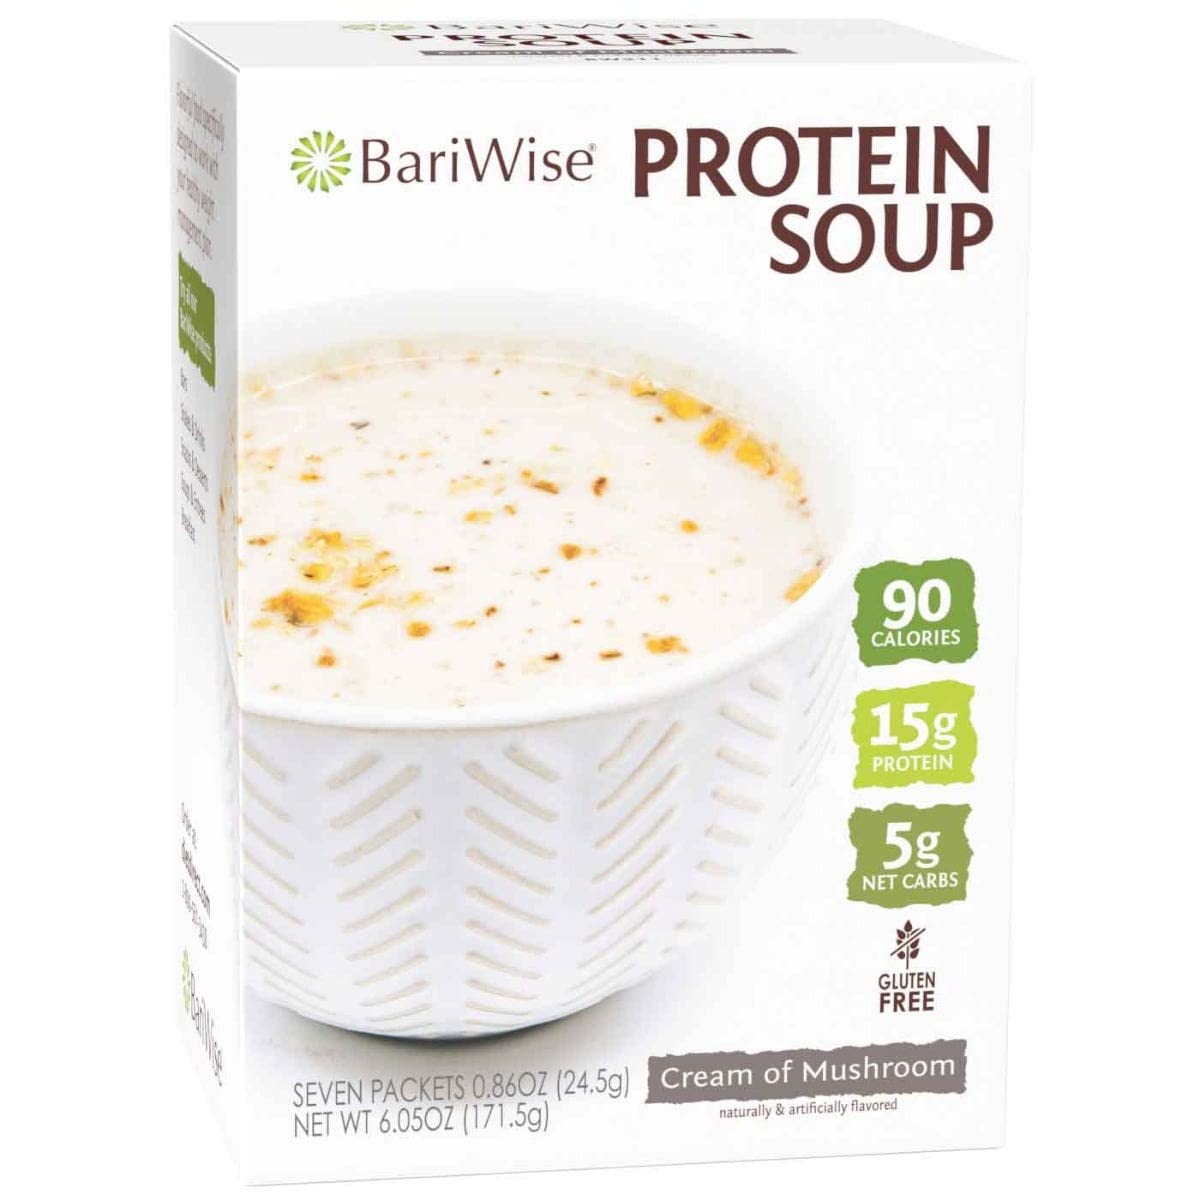 BariWise Protein Soup Mix, Cream of Mushroom - 90 Calories, 5g Net Carbs, 15 Protein (7ct)